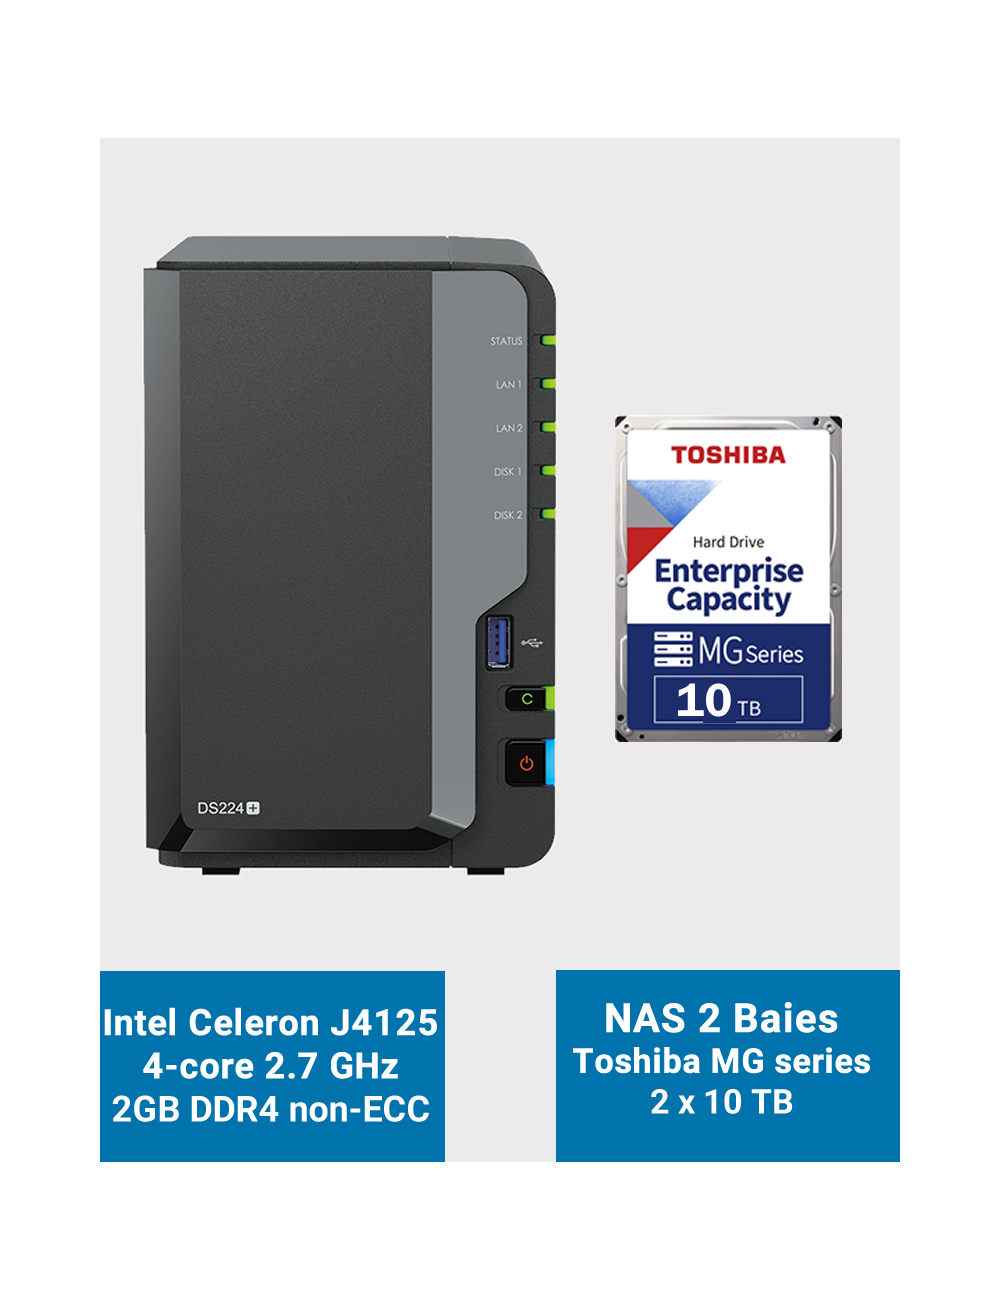 Synology DiskStation DS224+ 2Go Serveur NAS Toshiba MG series 20To (2x10To)